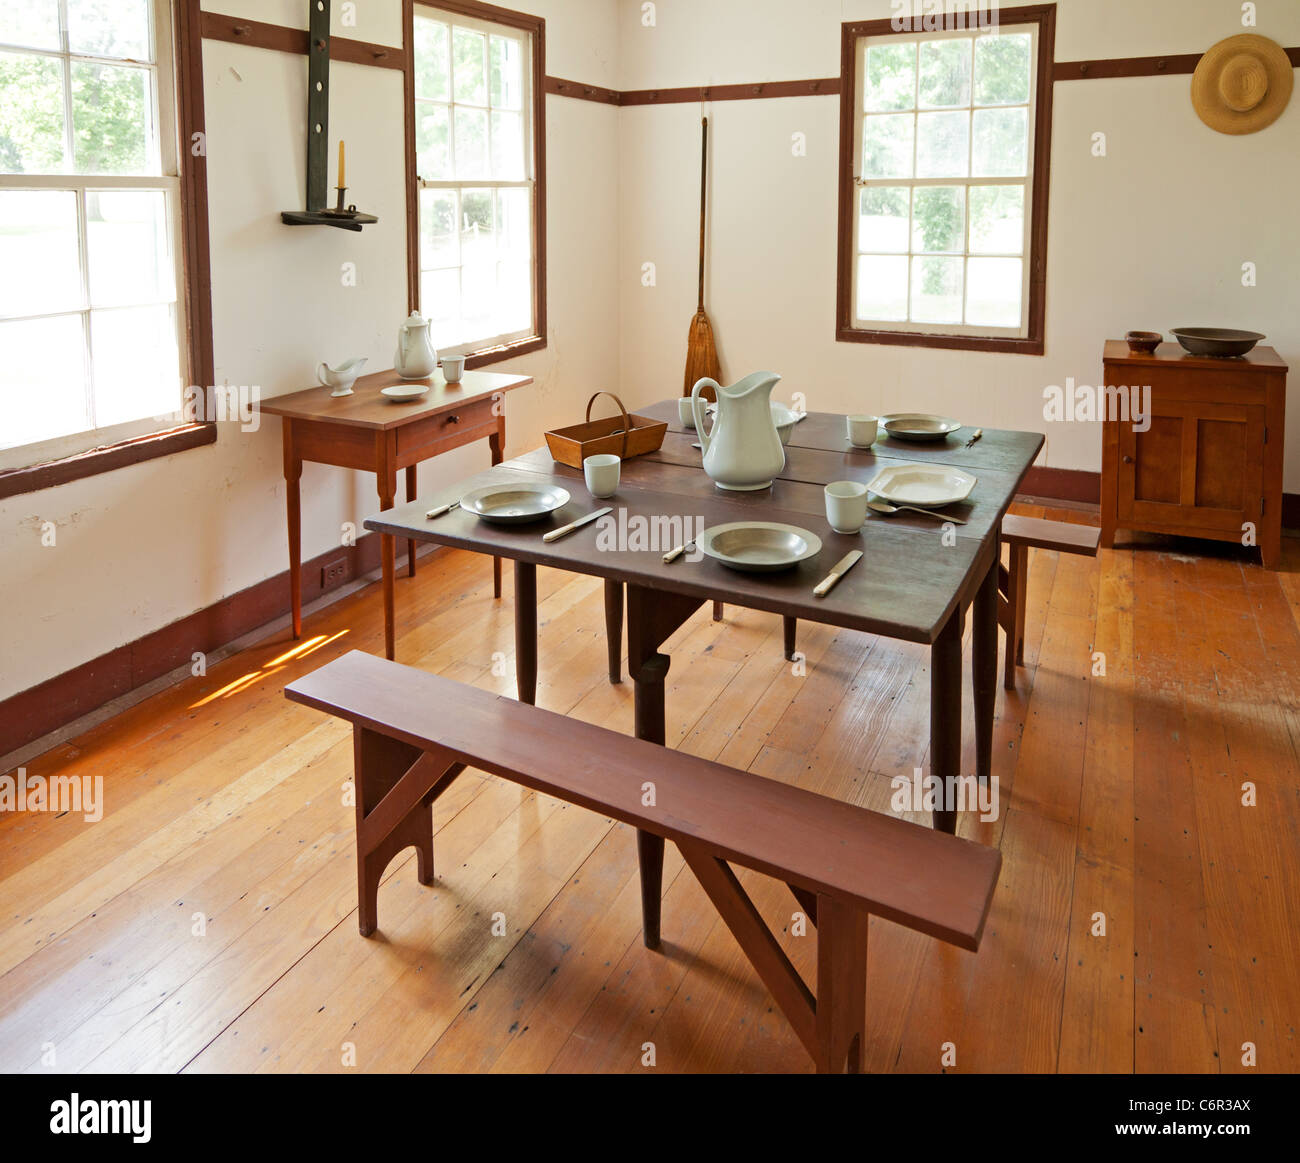 Dining room interior in a shaker home Stock Photo - Alamy